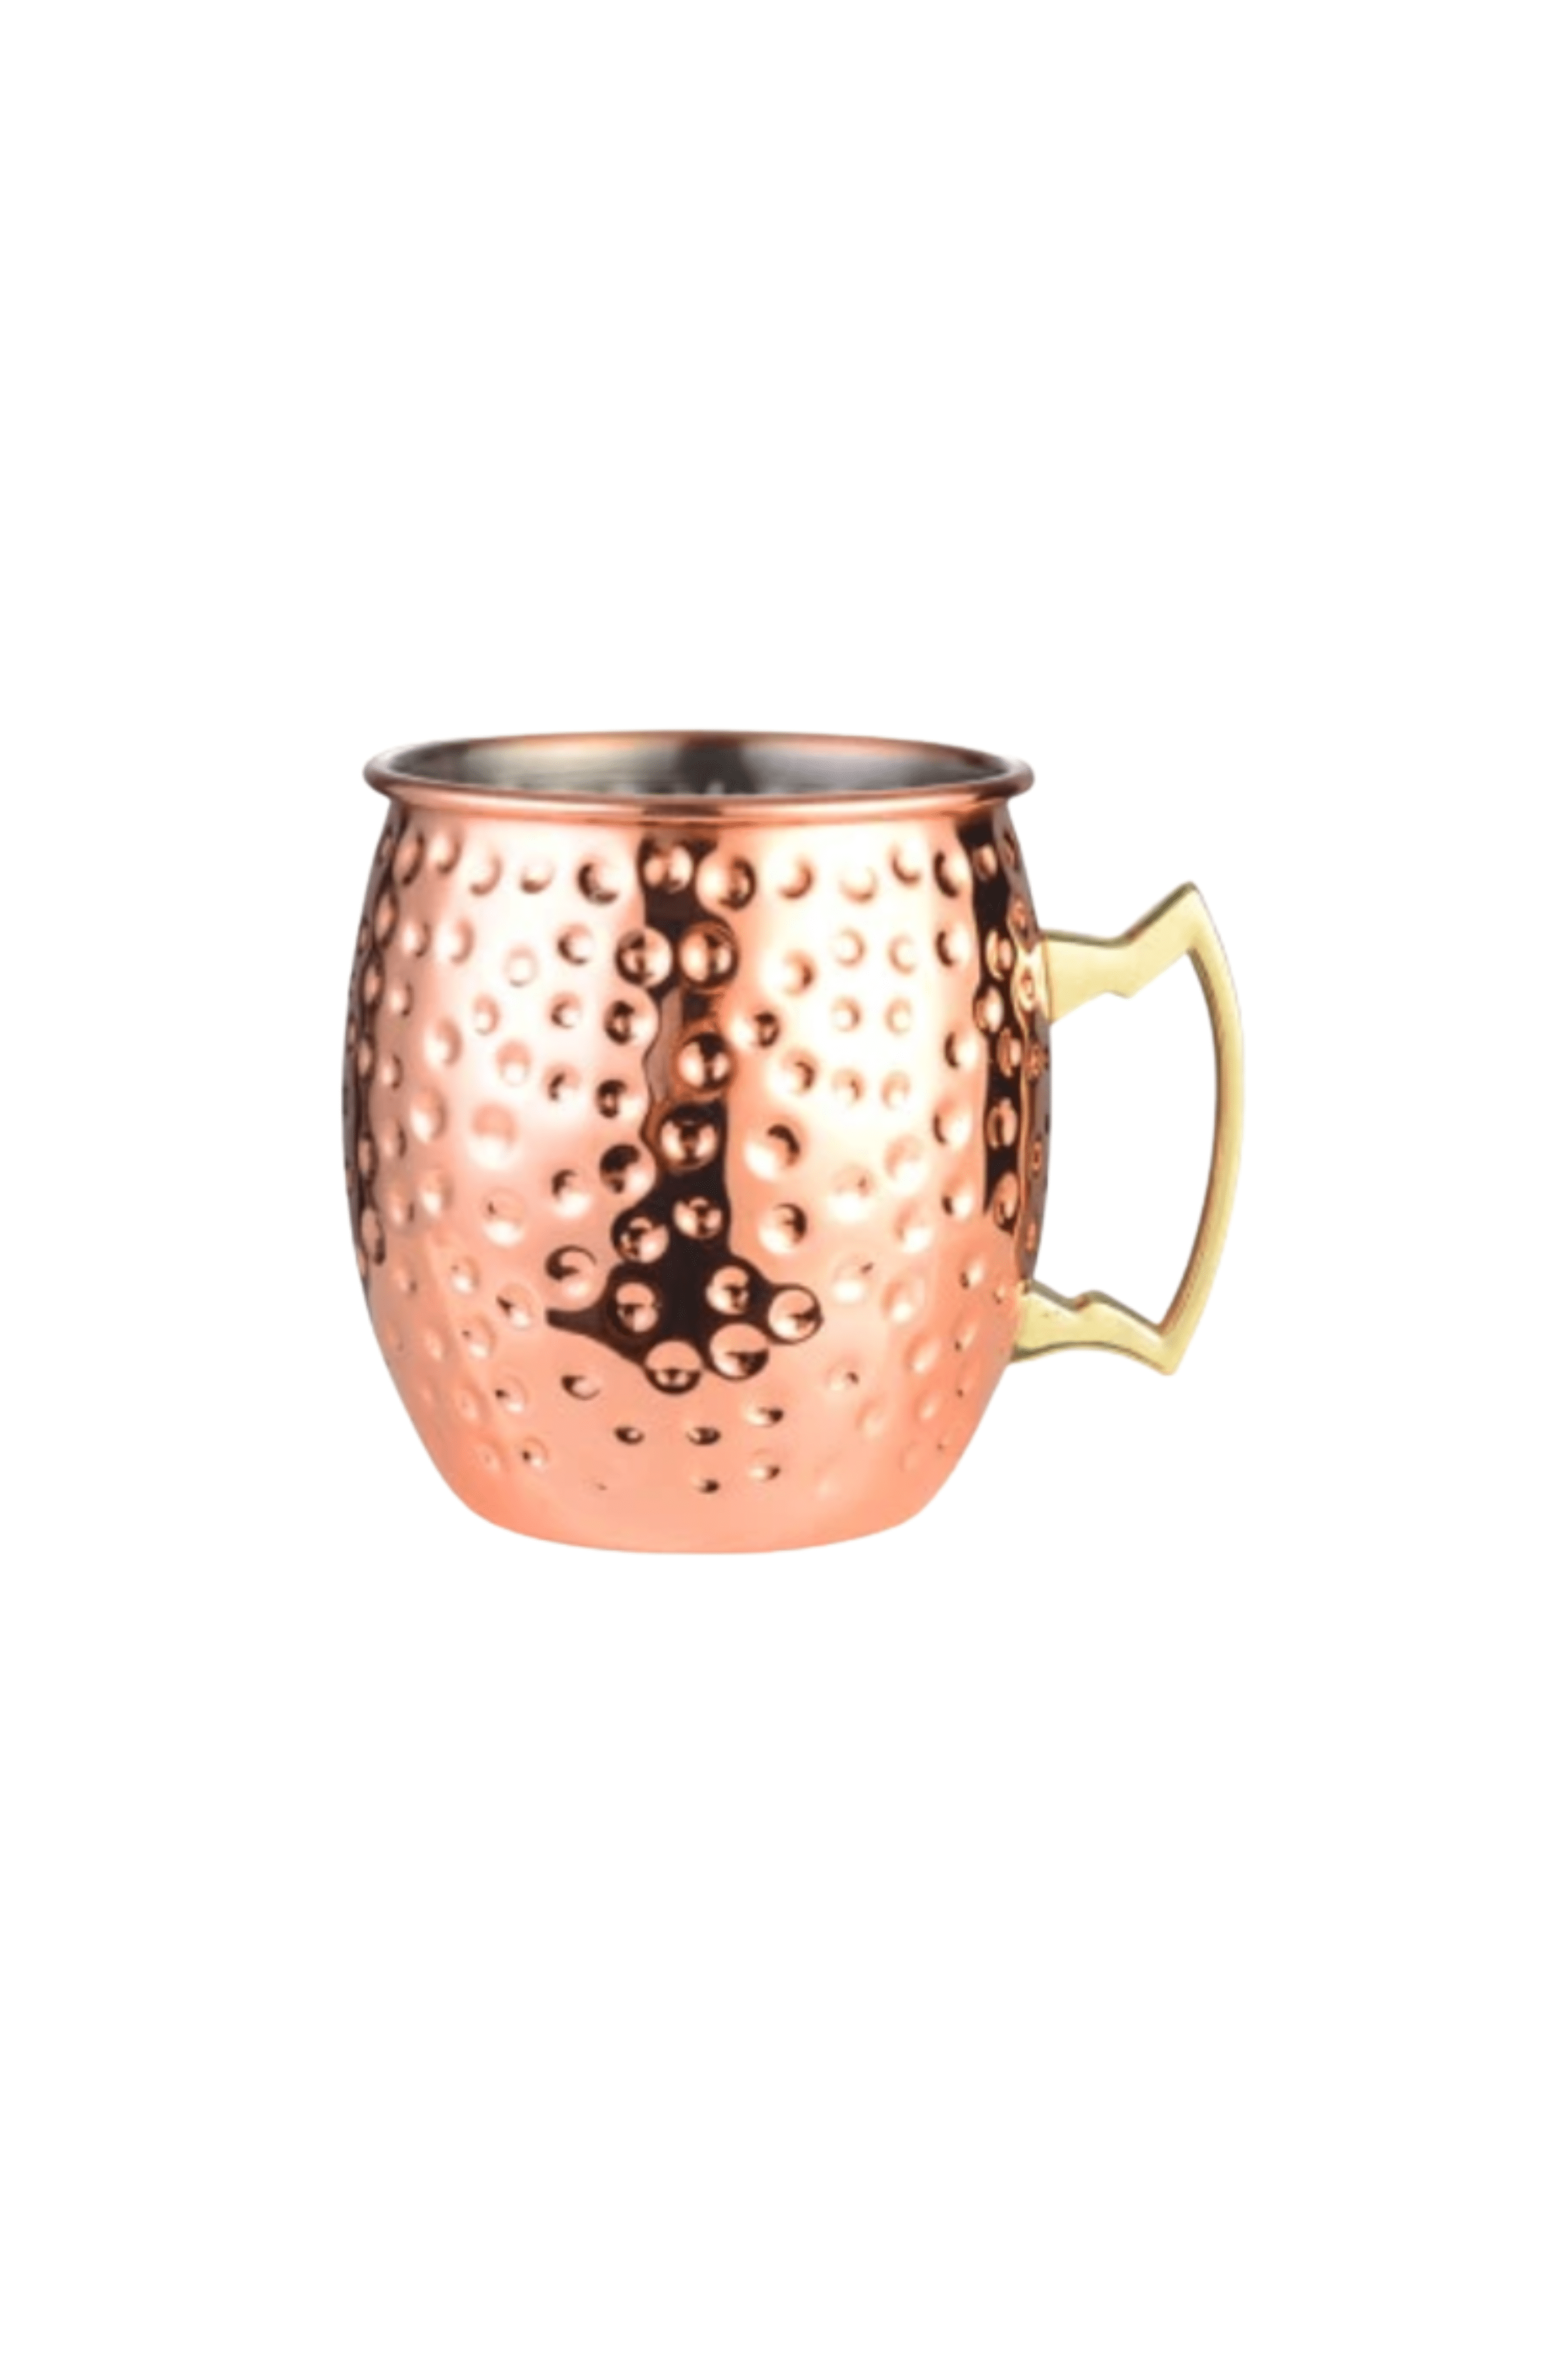 https://www.weddingevent.fr/wp-content/uploads/2023/03/moscow-mule.png